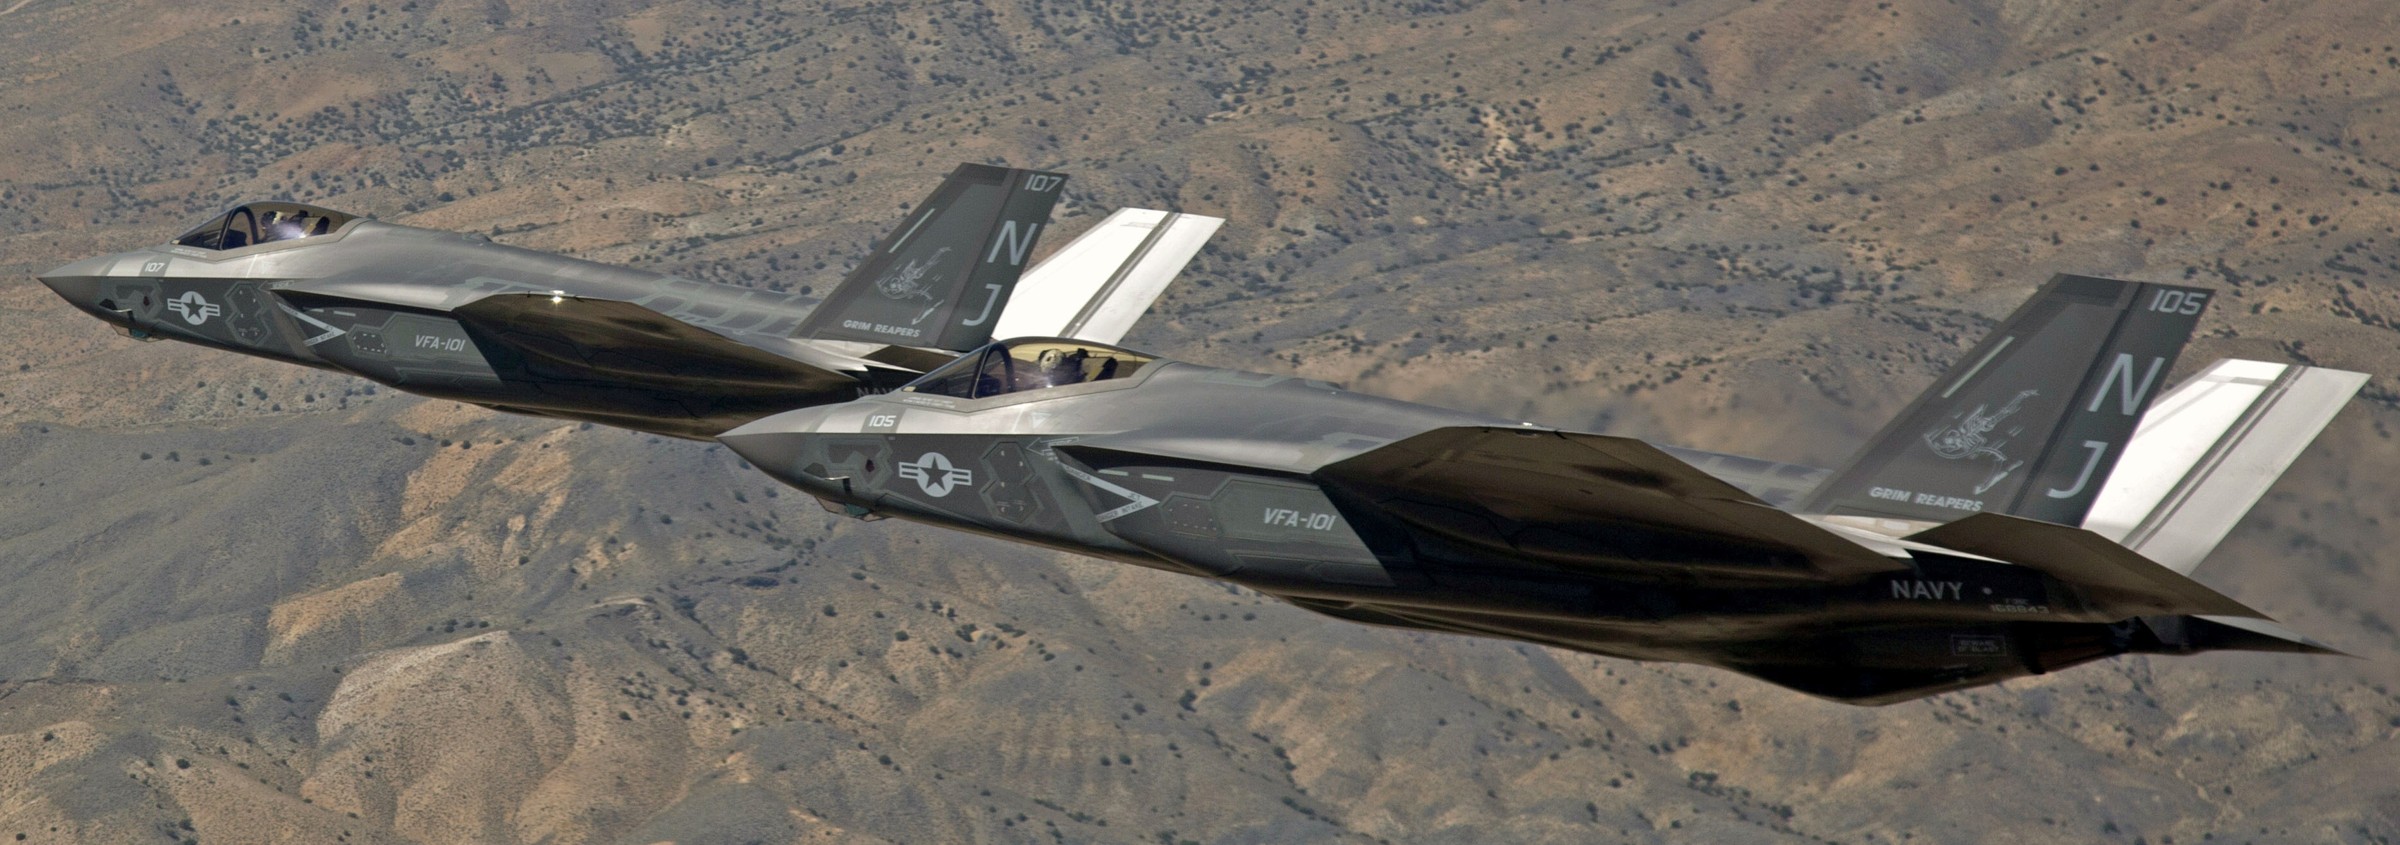 vfa-101 grim reapers strike fighter squadron us navy f-35c lightning jsf frs 06